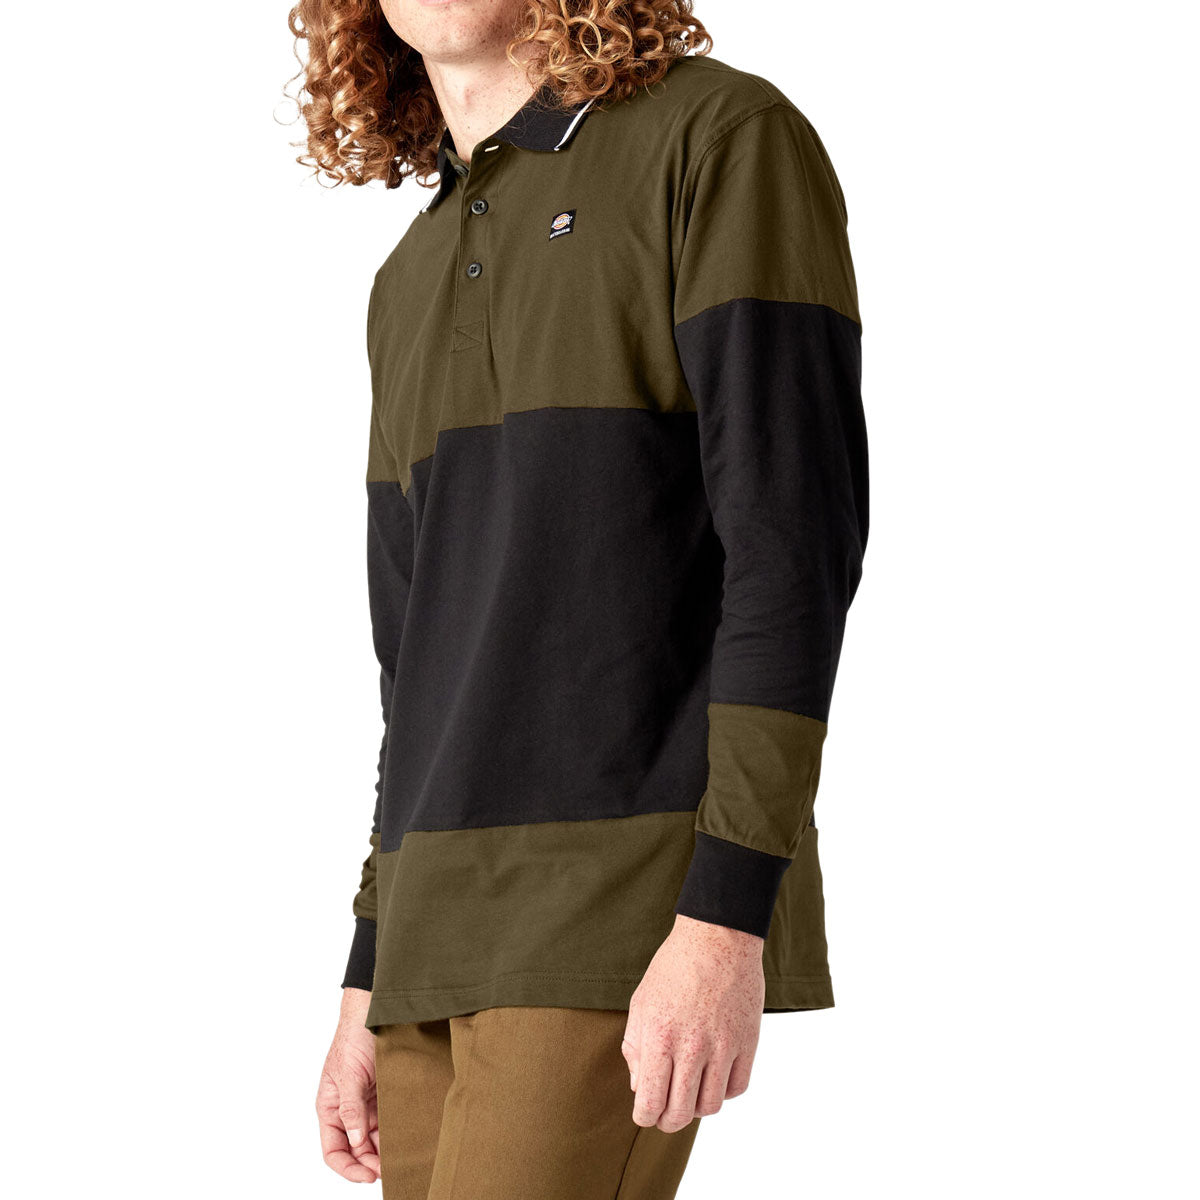 Dickies Rugby Long Sleeve Polo Shirt - Dark Olive image 3